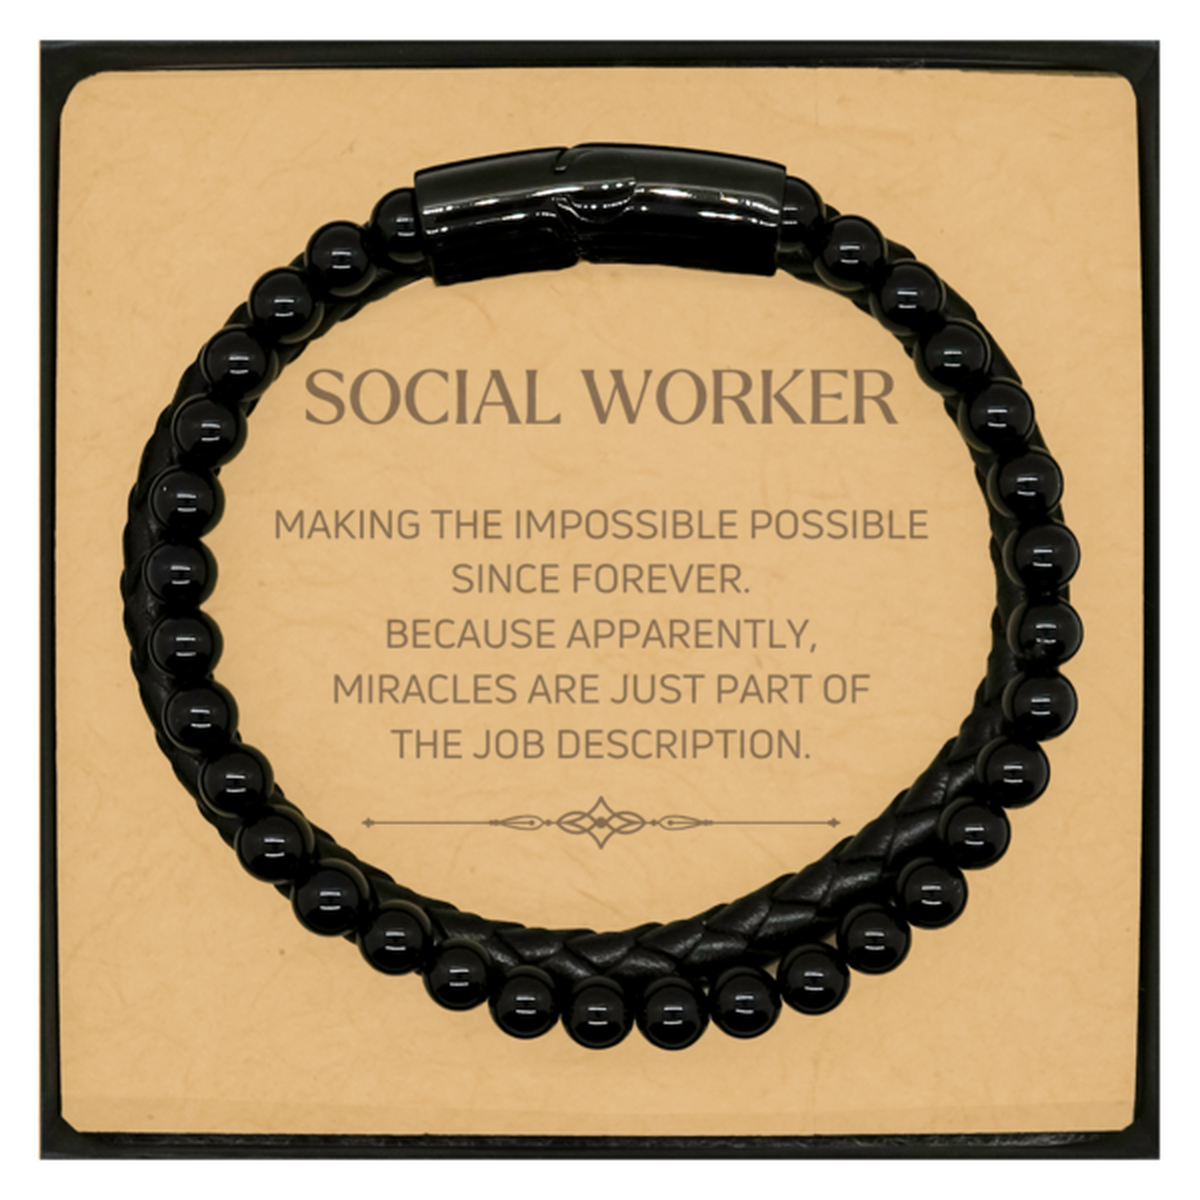 Funny Social Worker Gifts, Miracles are just part of the job description, Inspirational Birthday Christmas Stone Leather Bracelets For Social Worker, Men, Women, Coworkers, Friends, Boss